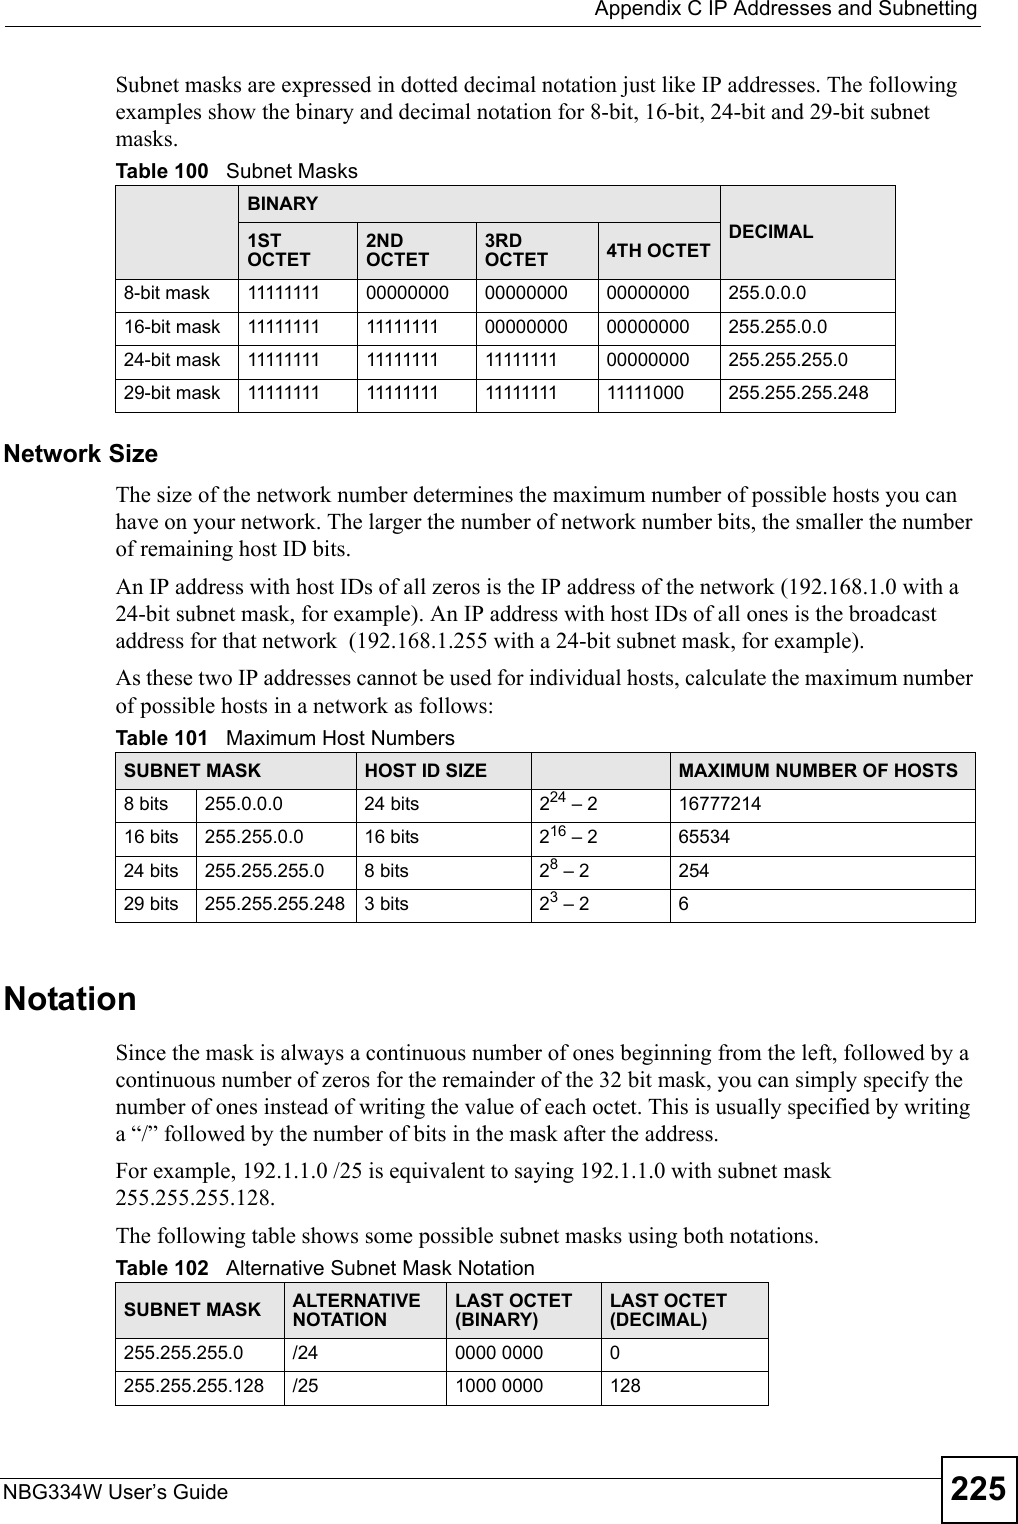  Appendix C IP Addresses and SubnettingNBG334W User’s Guide 225Subnet masks are expressed in dotted decimal notation just like IP addresses. The following examples show the binary and decimal notation for 8-bit, 16-bit, 24-bit and 29-bit subnet masks. Network SizeThe size of the network number determines the maximum number of possible hosts you can have on your network. The larger the number of network number bits, the smaller the number of remaining host ID bits. An IP address with host IDs of all zeros is the IP address of the network (192.168.1.0 with a 24-bit subnet mask, for example). An IP address with host IDs of all ones is the broadcast address for that network  (192.168.1.255 with a 24-bit subnet mask, for example).As these two IP addresses cannot be used for individual hosts, calculate the maximum number of possible hosts in a network as follows:NotationSince the mask is always a continuous number of ones beginning from the left, followed by a continuous number of zeros for the remainder of the 32 bit mask, you can simply specify the number of ones instead of writing the value of each octet. This is usually specified by writing a “/” followed by the number of bits in the mask after the address. For example, 192.1.1.0 /25 is equivalent to saying 192.1.1.0 with subnet mask 255.255.255.128. The following table shows some possible subnet masks using both notations. Table 100   Subnet MasksBINARYDECIMAL1ST OCTET2ND OCTET3RD OCTET 4TH OCTET8-bit mask 11111111 00000000 00000000 00000000 255.0.0.016-bit mask 11111111 11111111 00000000 00000000 255.255.0.024-bit mask 11111111 11111111 11111111 00000000 255.255.255.029-bit mask 11111111 11111111 11111111 11111000 255.255.255.248Table 101   Maximum Host NumbersSUBNET MASK HOST ID SIZE MAXIMUM NUMBER OF HOSTS8 bits 255.0.0.0 24 bits 224 – 2 1677721416 bits 255.255.0.0 16 bits 216 – 2 6553424 bits 255.255.255.0 8 bits 28 – 2 25429 bits 255.255.255.248 3 bits 23 – 2 6Table 102   Alternative Subnet Mask NotationSUBNET MASK ALTERNATIVE NOTATIONLAST OCTET (BINARY)LAST OCTET (DECIMAL)255.255.255.0 /24 0000 0000 0255.255.255.128 /25 1000 0000 128